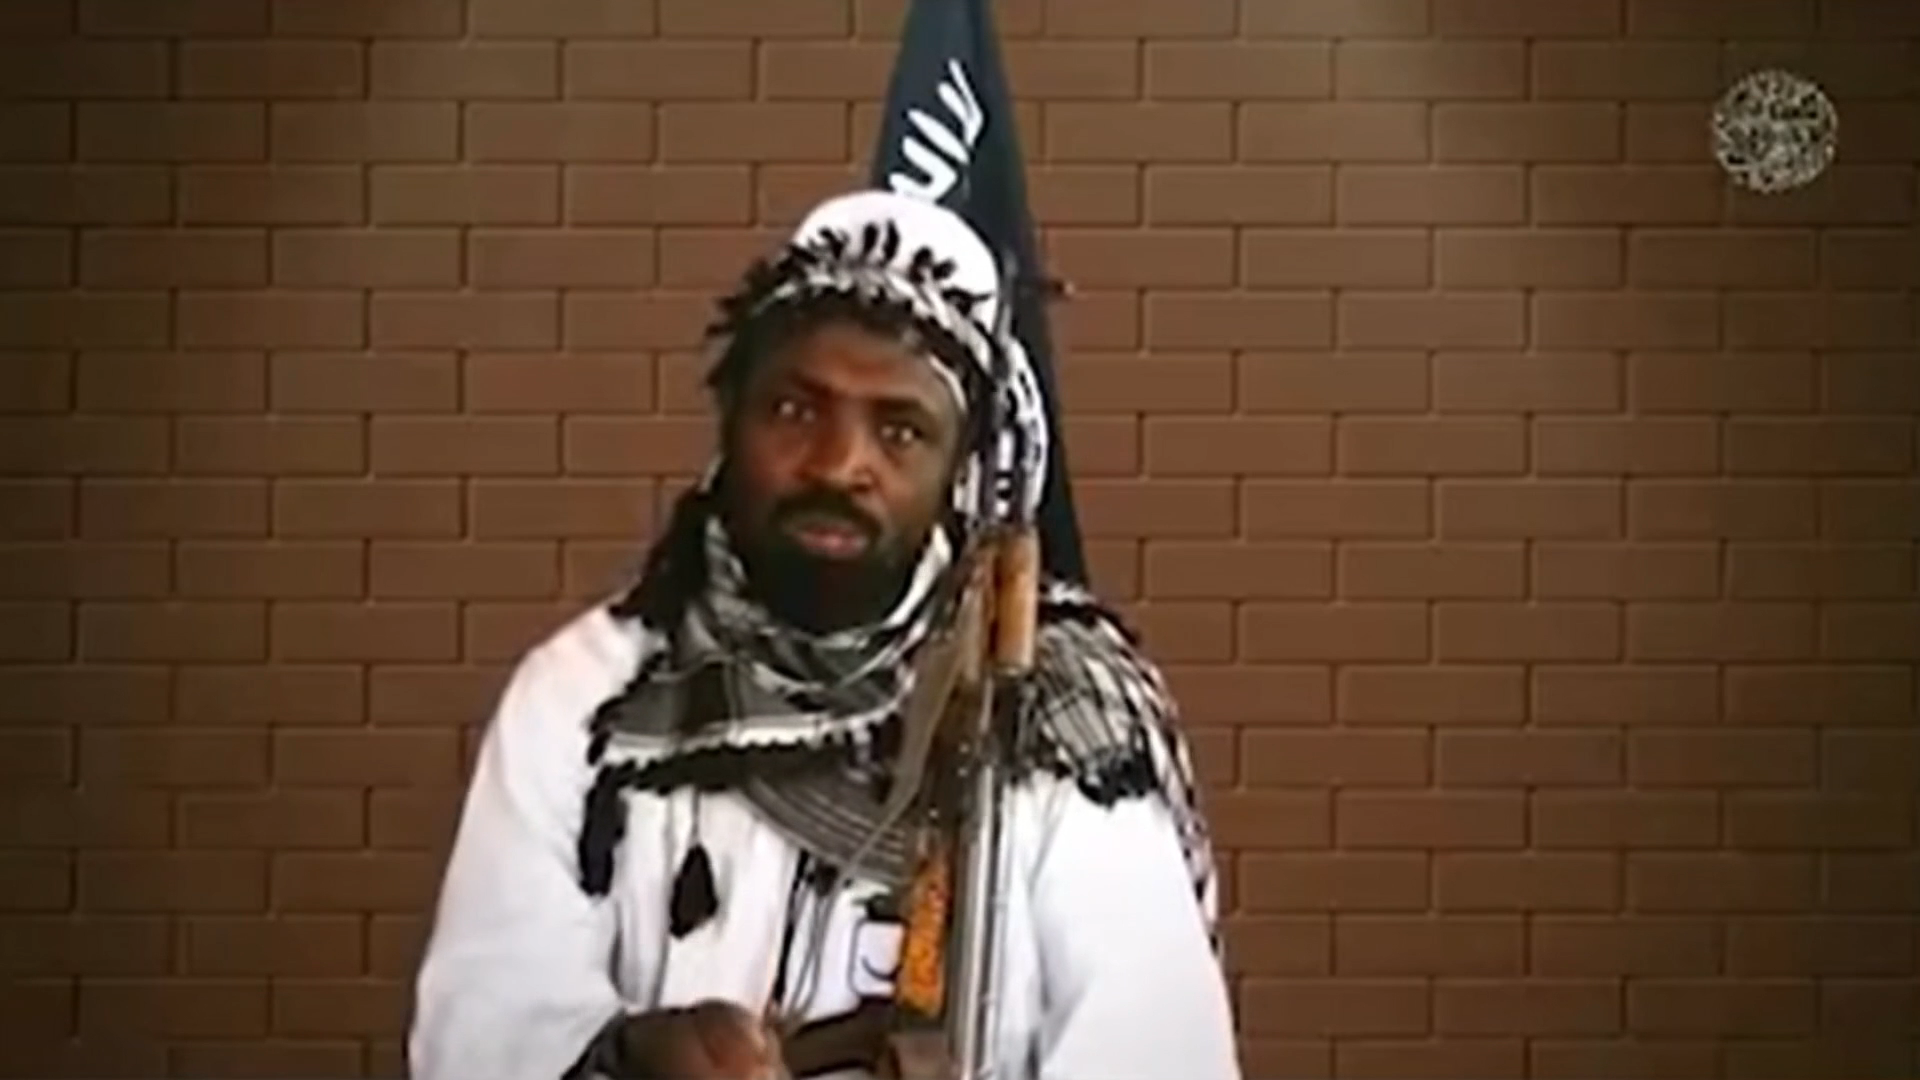 Boko Haram Leader Abubakar Shekau Died After Setting Off Explosive While Being Chased By Rivals : IS Offshoot Claims